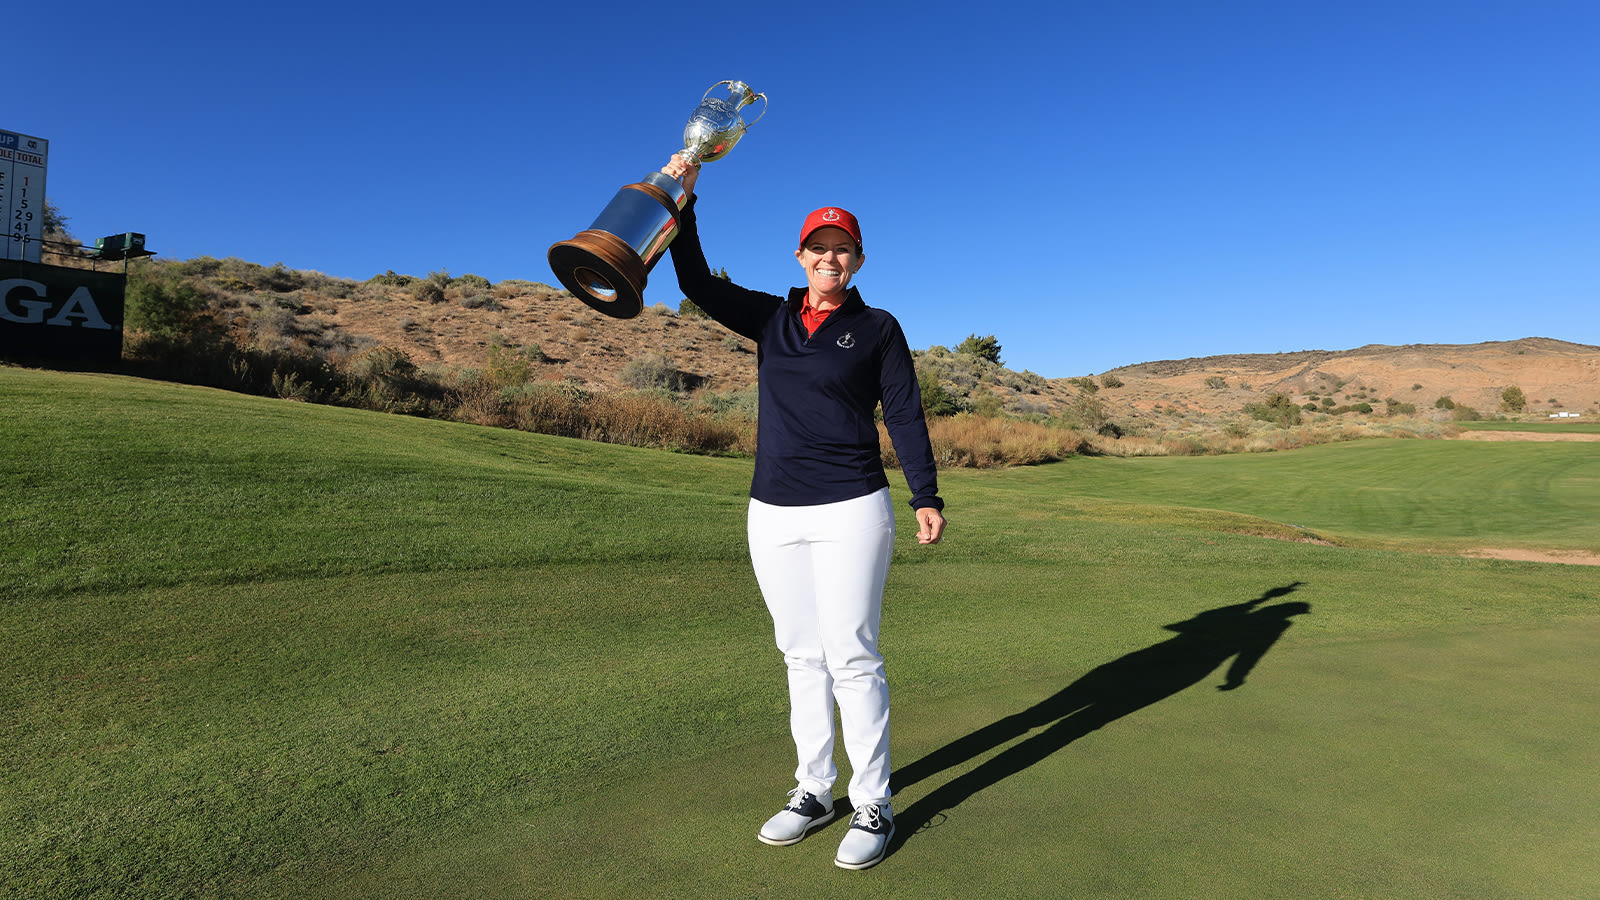 Stephanie Connelly-Eiswerth of the U.S. Team poses for a photo with the Women's PGA Cup during the final round of the 2nd Women's PGA Cup at Twin Warriors Golf Club on Saturday, October 29, 2022 in Santa Ana Pueblo, New Mexico. (Photo by Sam Greenwood/PGA of America)